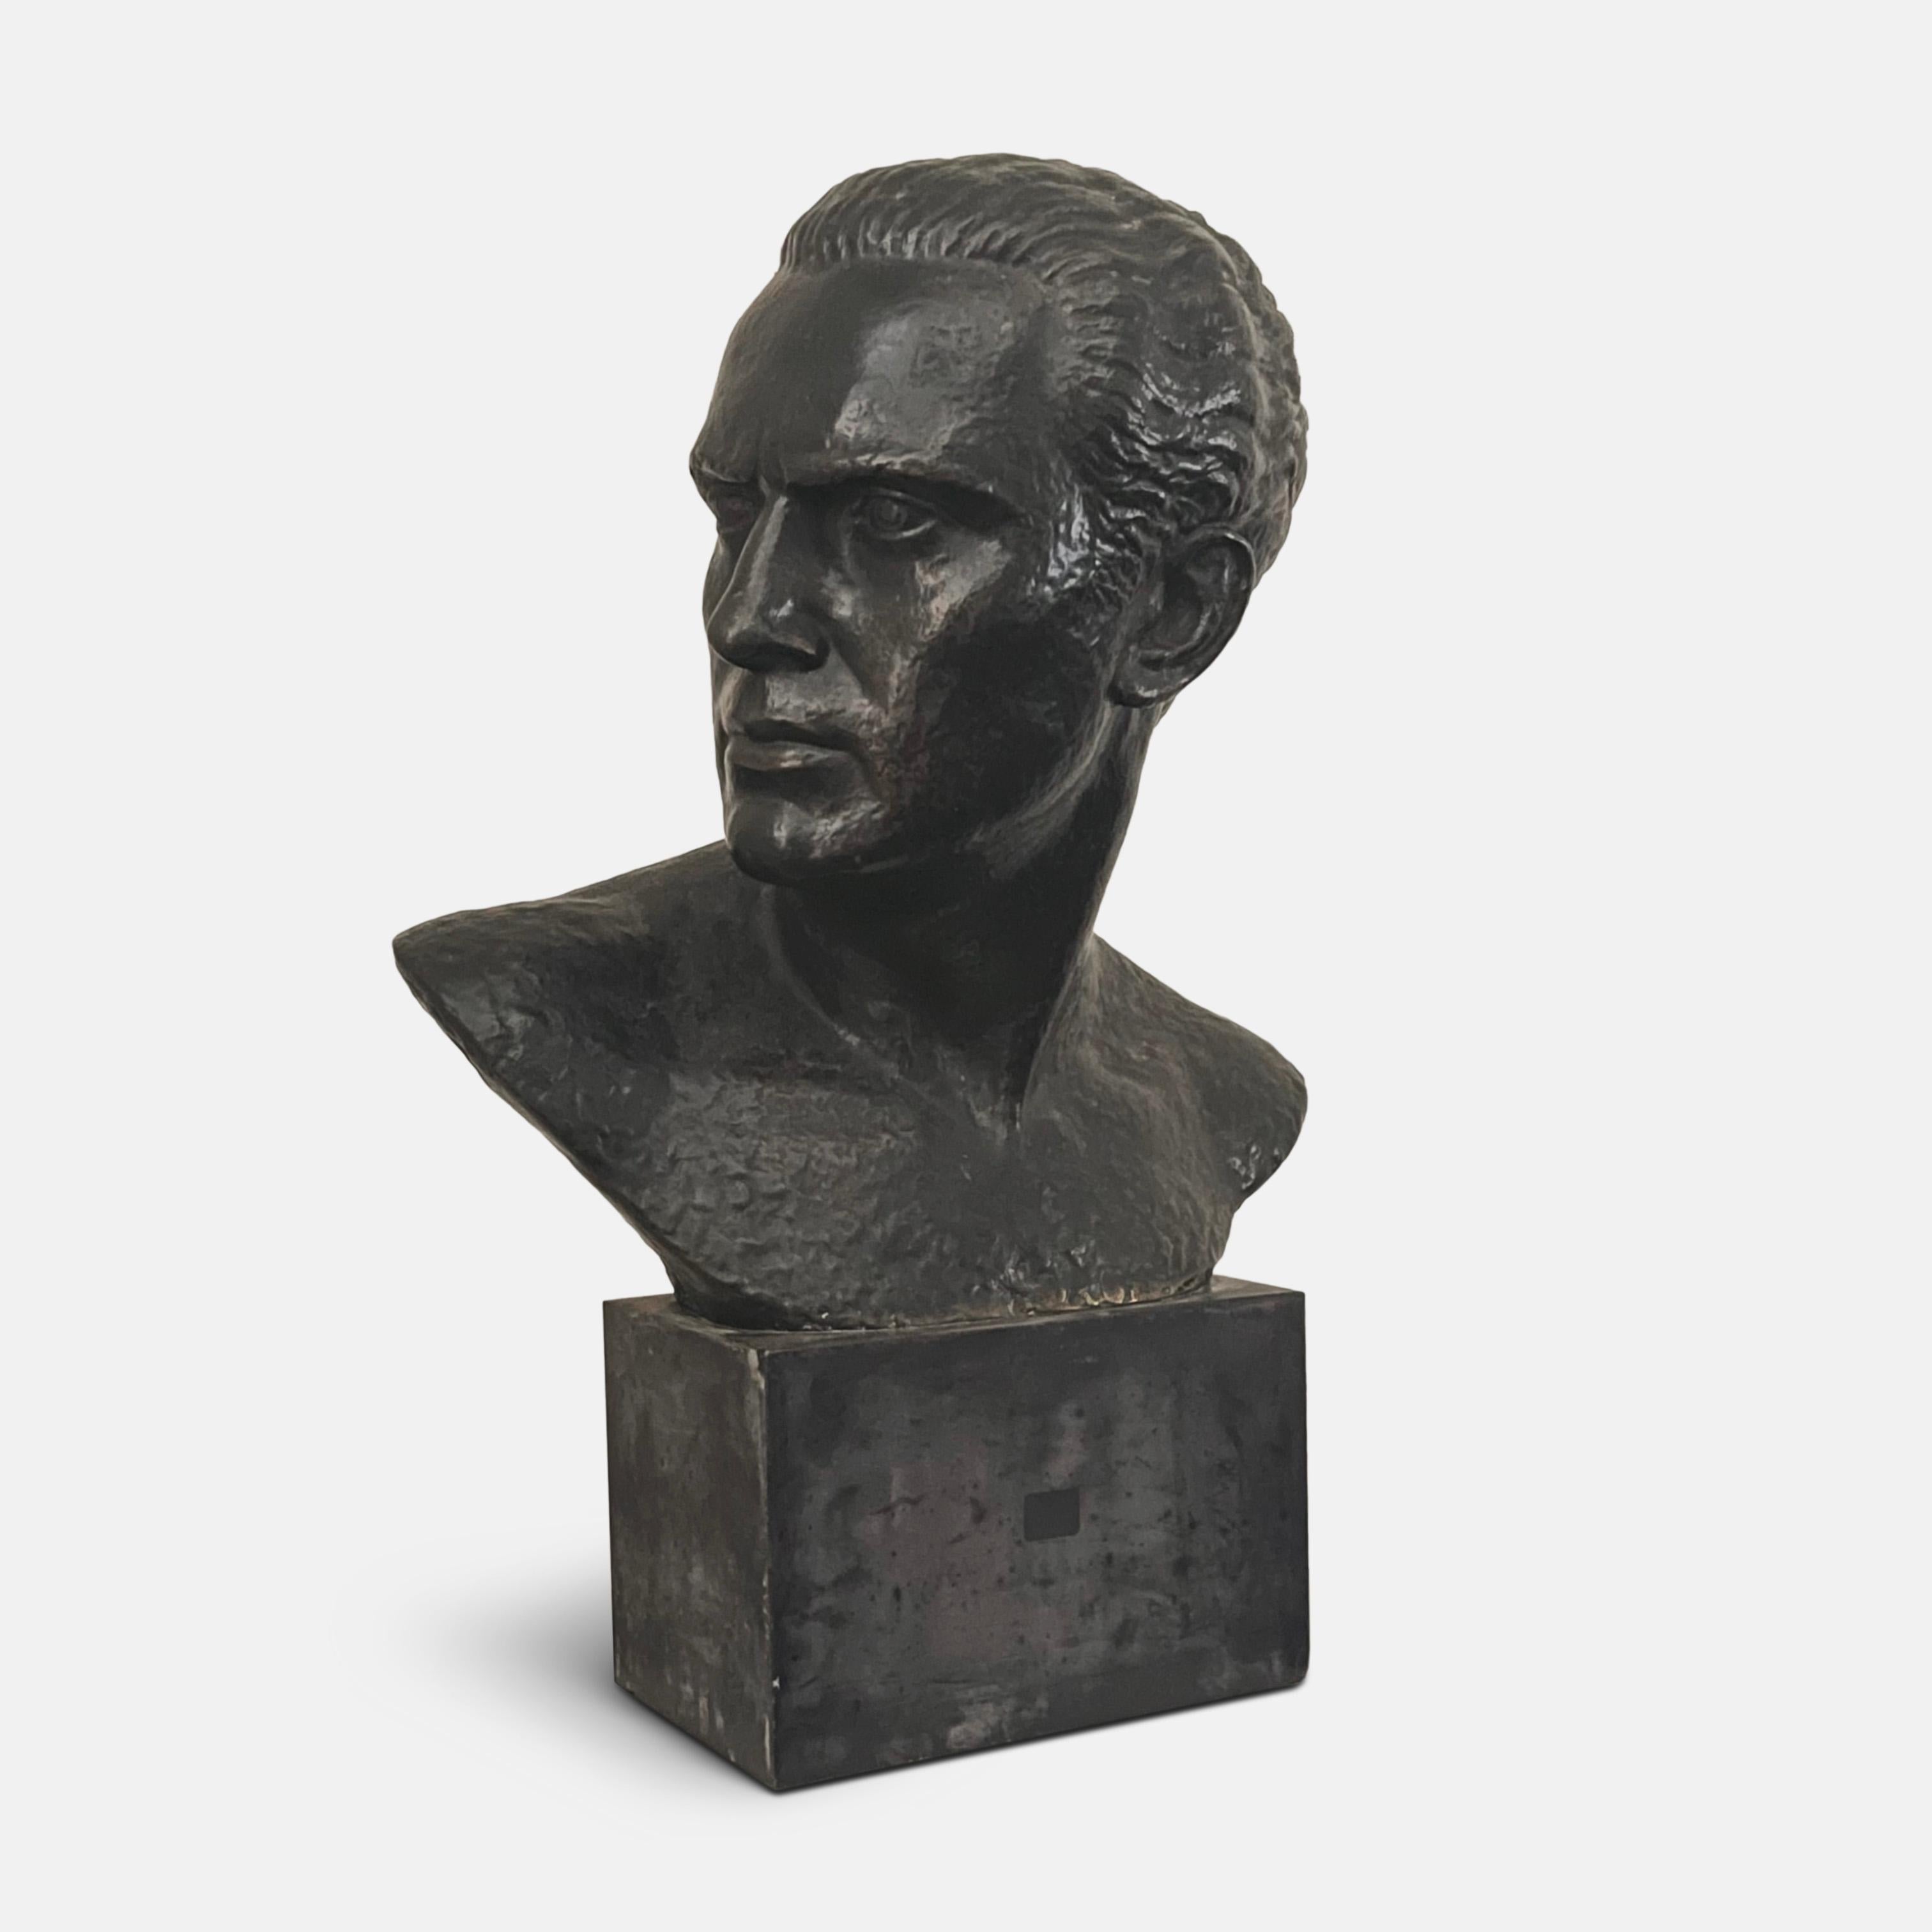 French Art Deco Bust of Jean Mermoz, Aviator - Cast in Bronze by Lucien Gibert For Sale 3